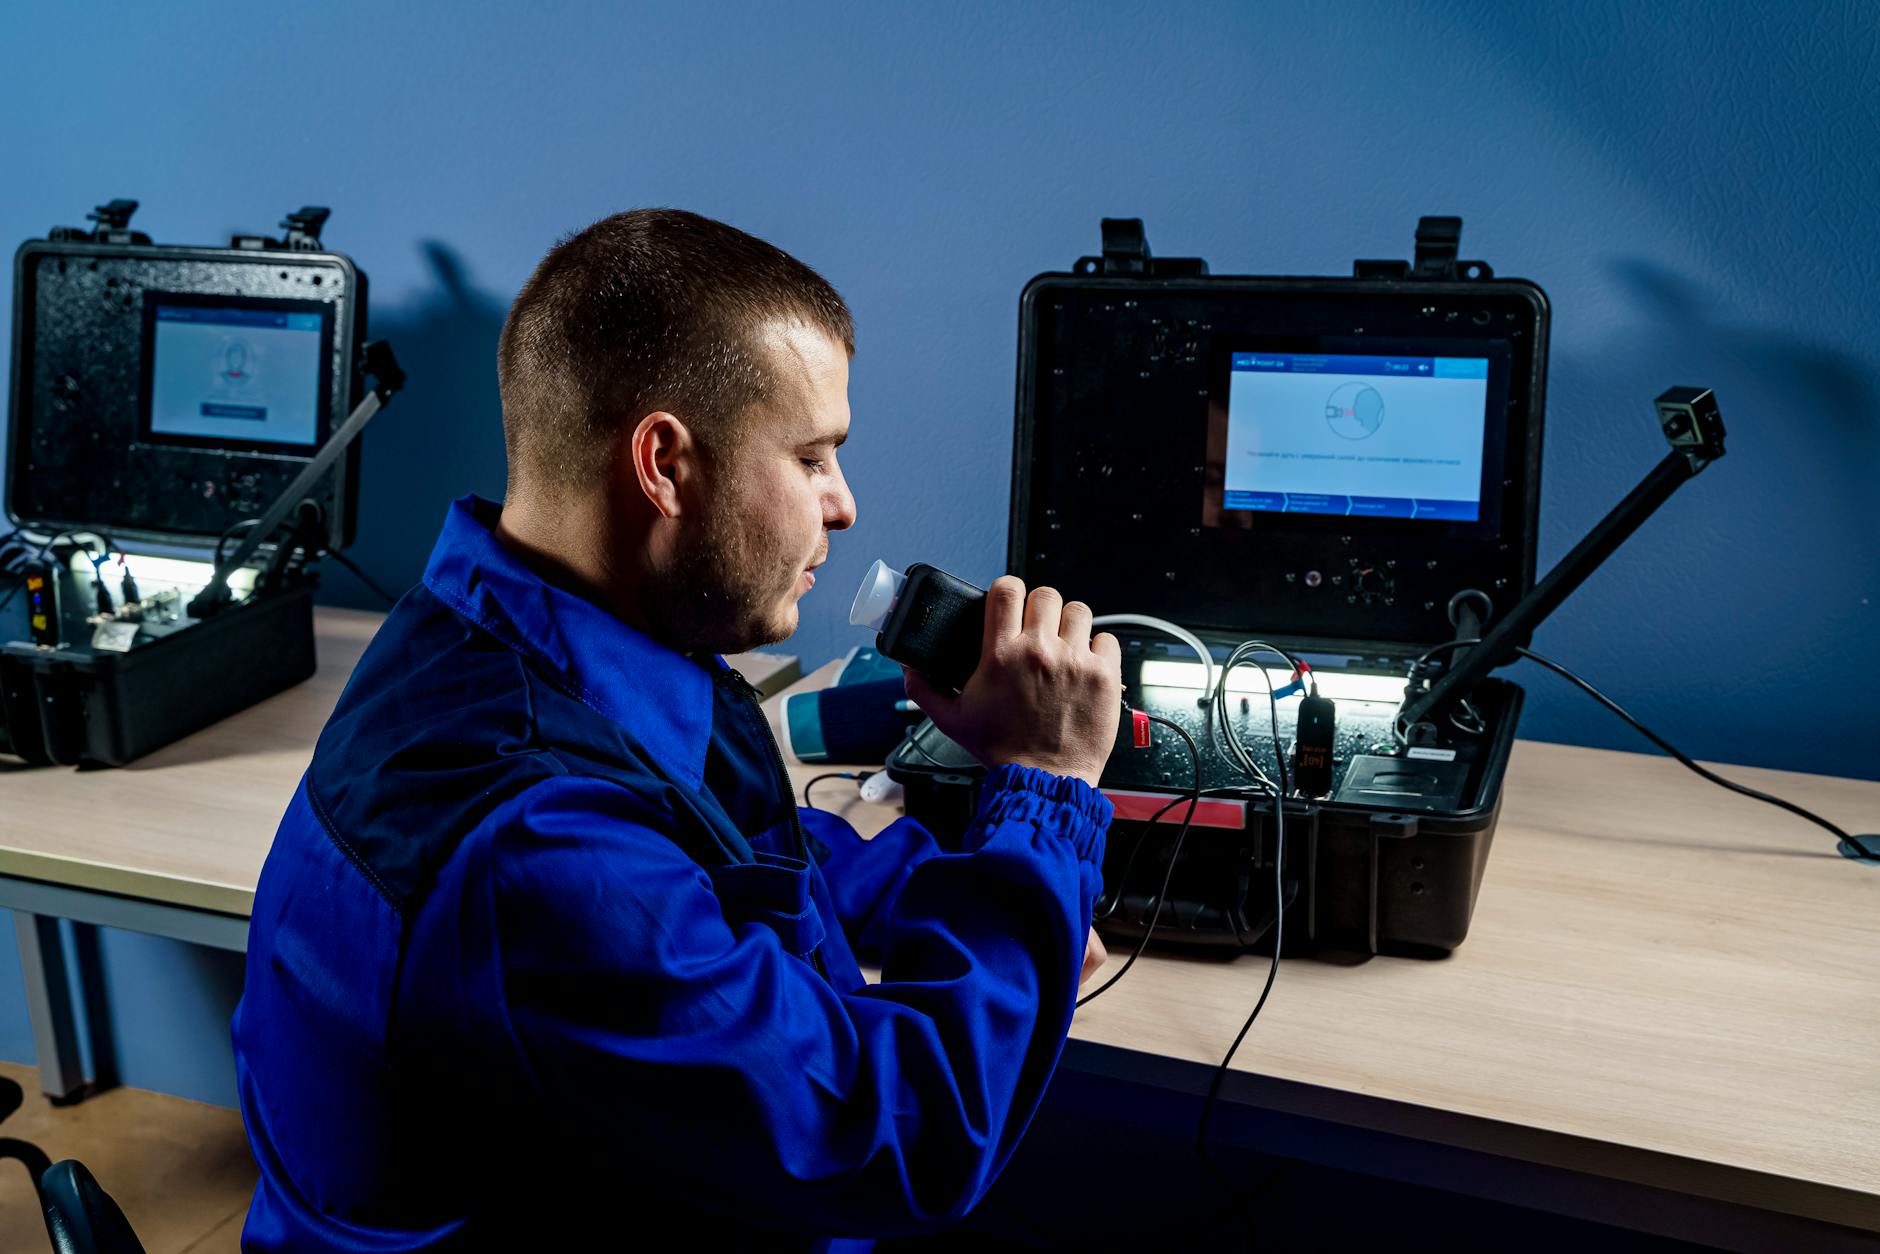 Personal Air Sampling: Monitoring and Analyzing Workplace Air Quality